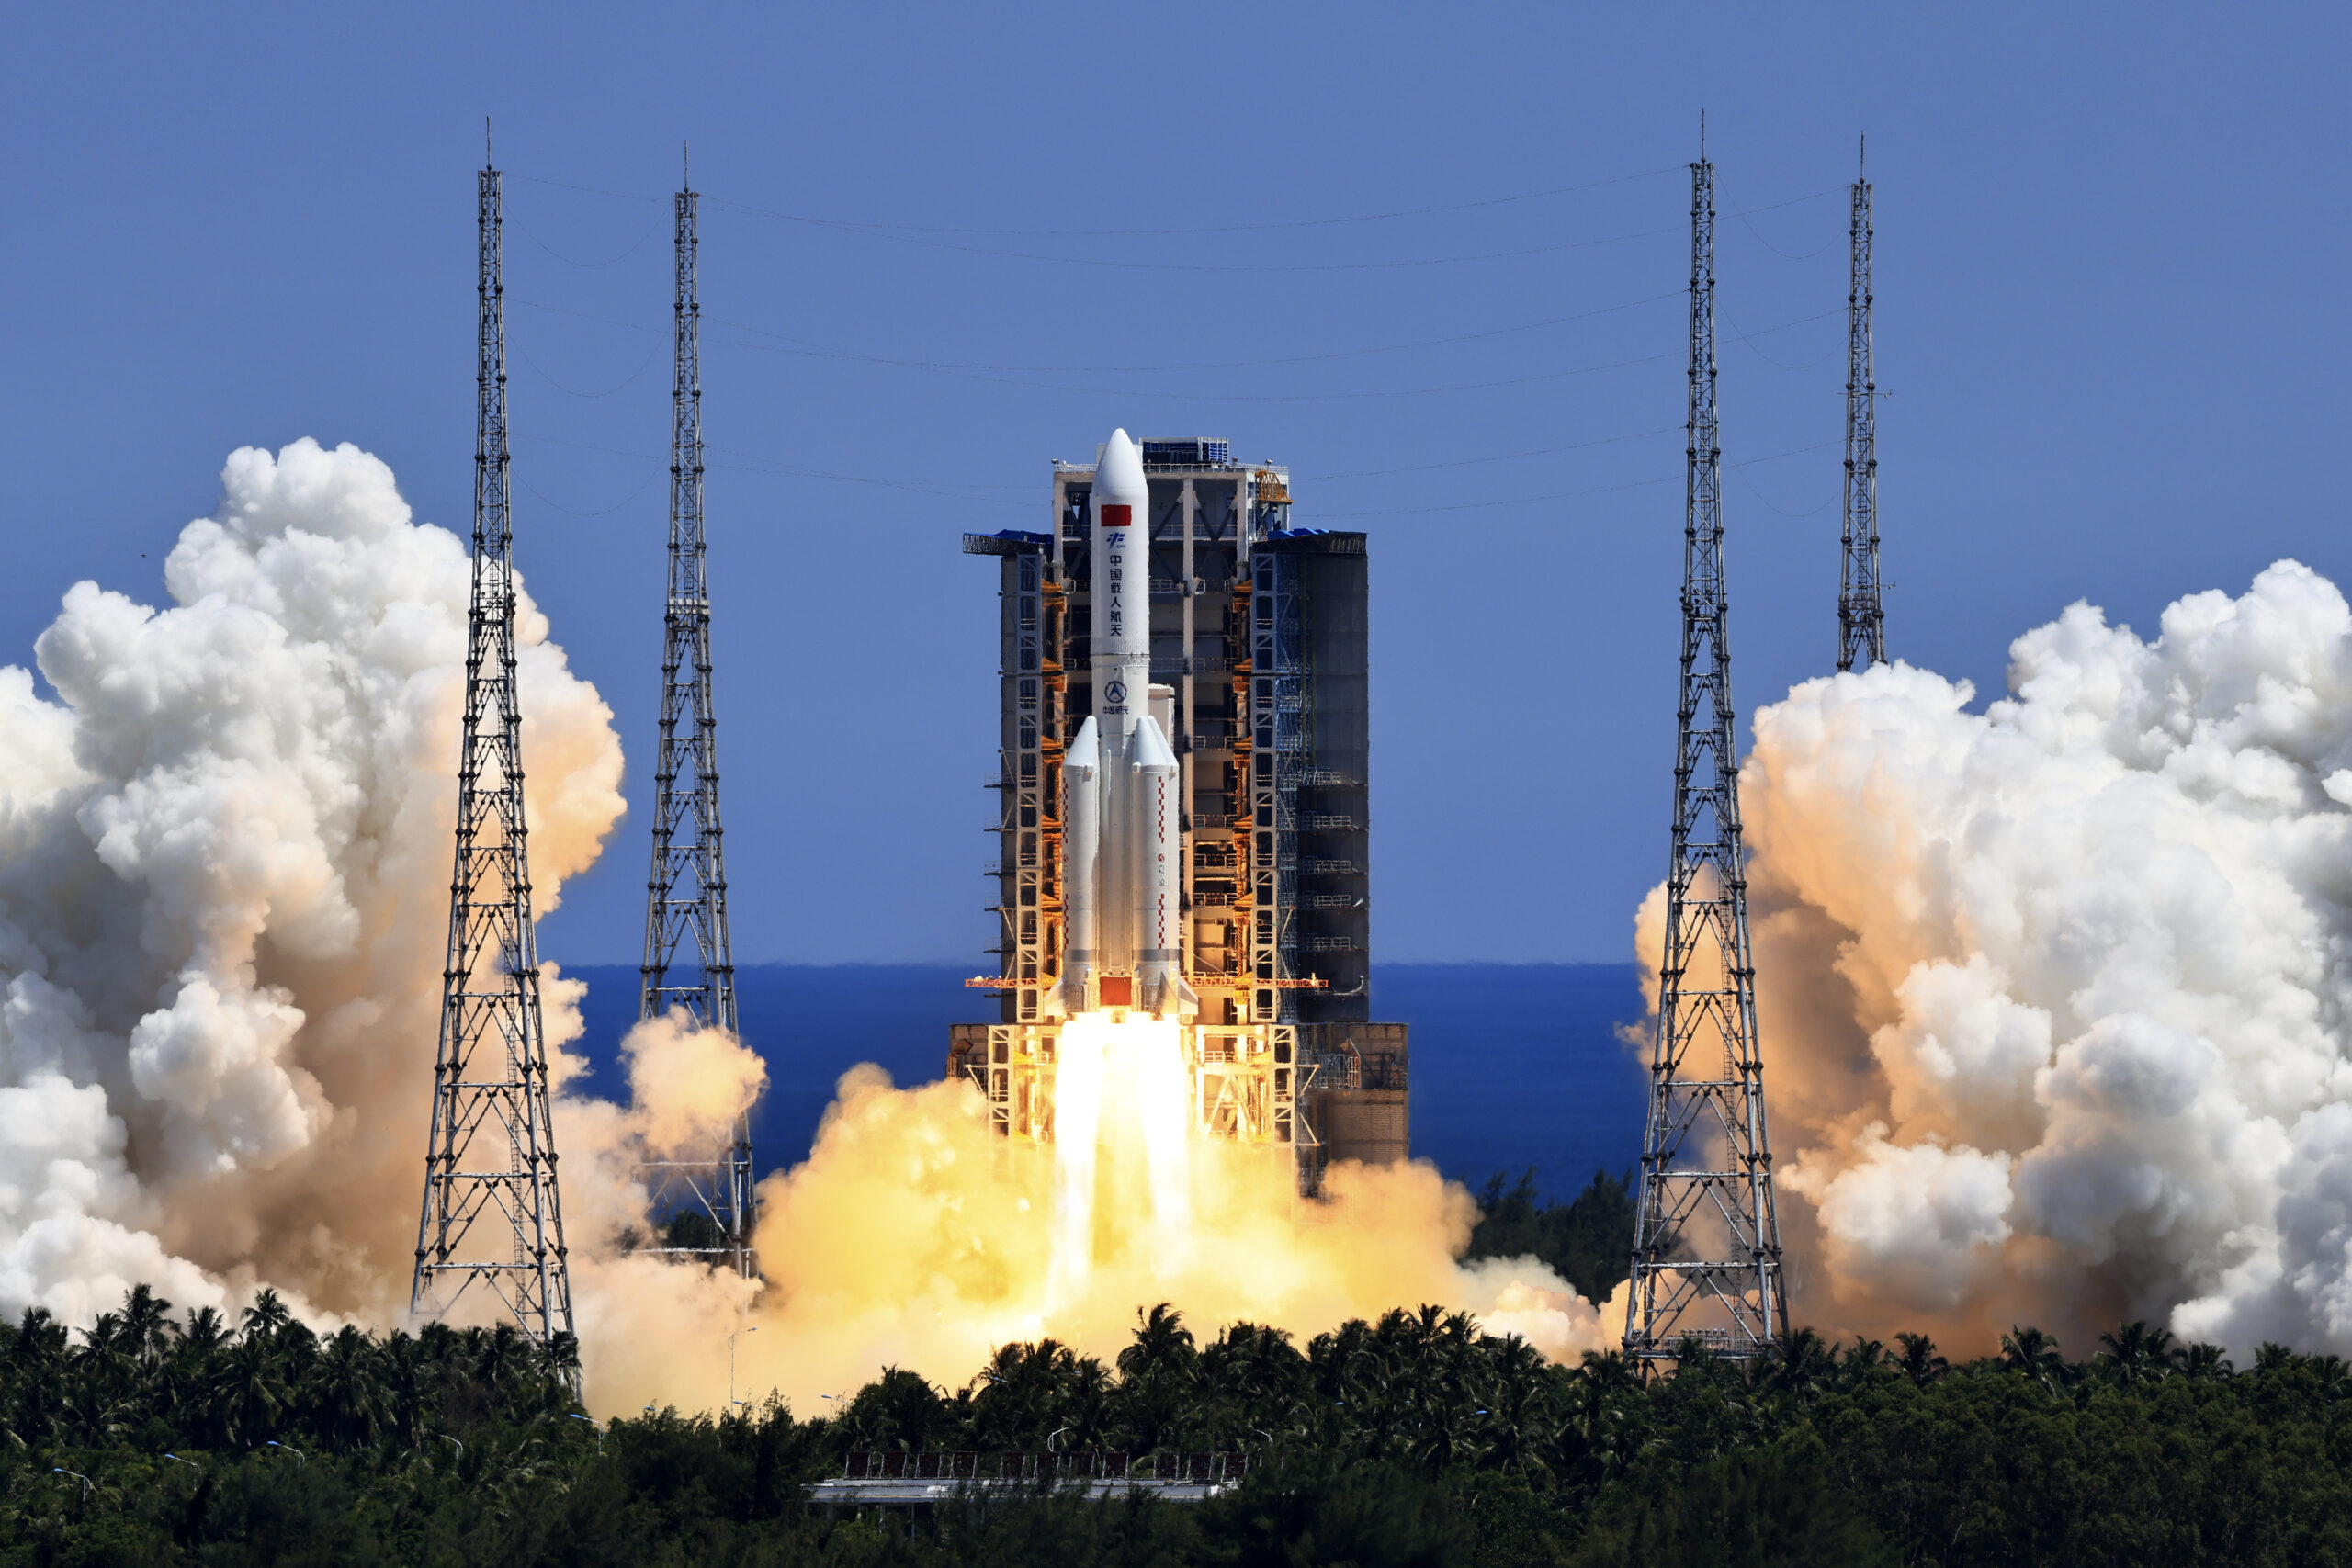 FILE - In this photo released by Xinhua News Agency, the Long March 5B Y3 carrier rocket, carrying Wentian lab module blasts off from the Wenchang Space Launch Center in Wenchang in southern China's Hainan Province Sunday, July 24, 2022. Debris from the rocket that boosted part of China’s new space station into orbit fell into the sea in the Philippines on Sunday, July 31, the Chinese government announced. Most of the final stage of the Long March-5B rocket burned up after entering the atmosphere at 12:55 a.m., the China Manned Space Agency reported. (Li Gang/Xinhua via AP, File)